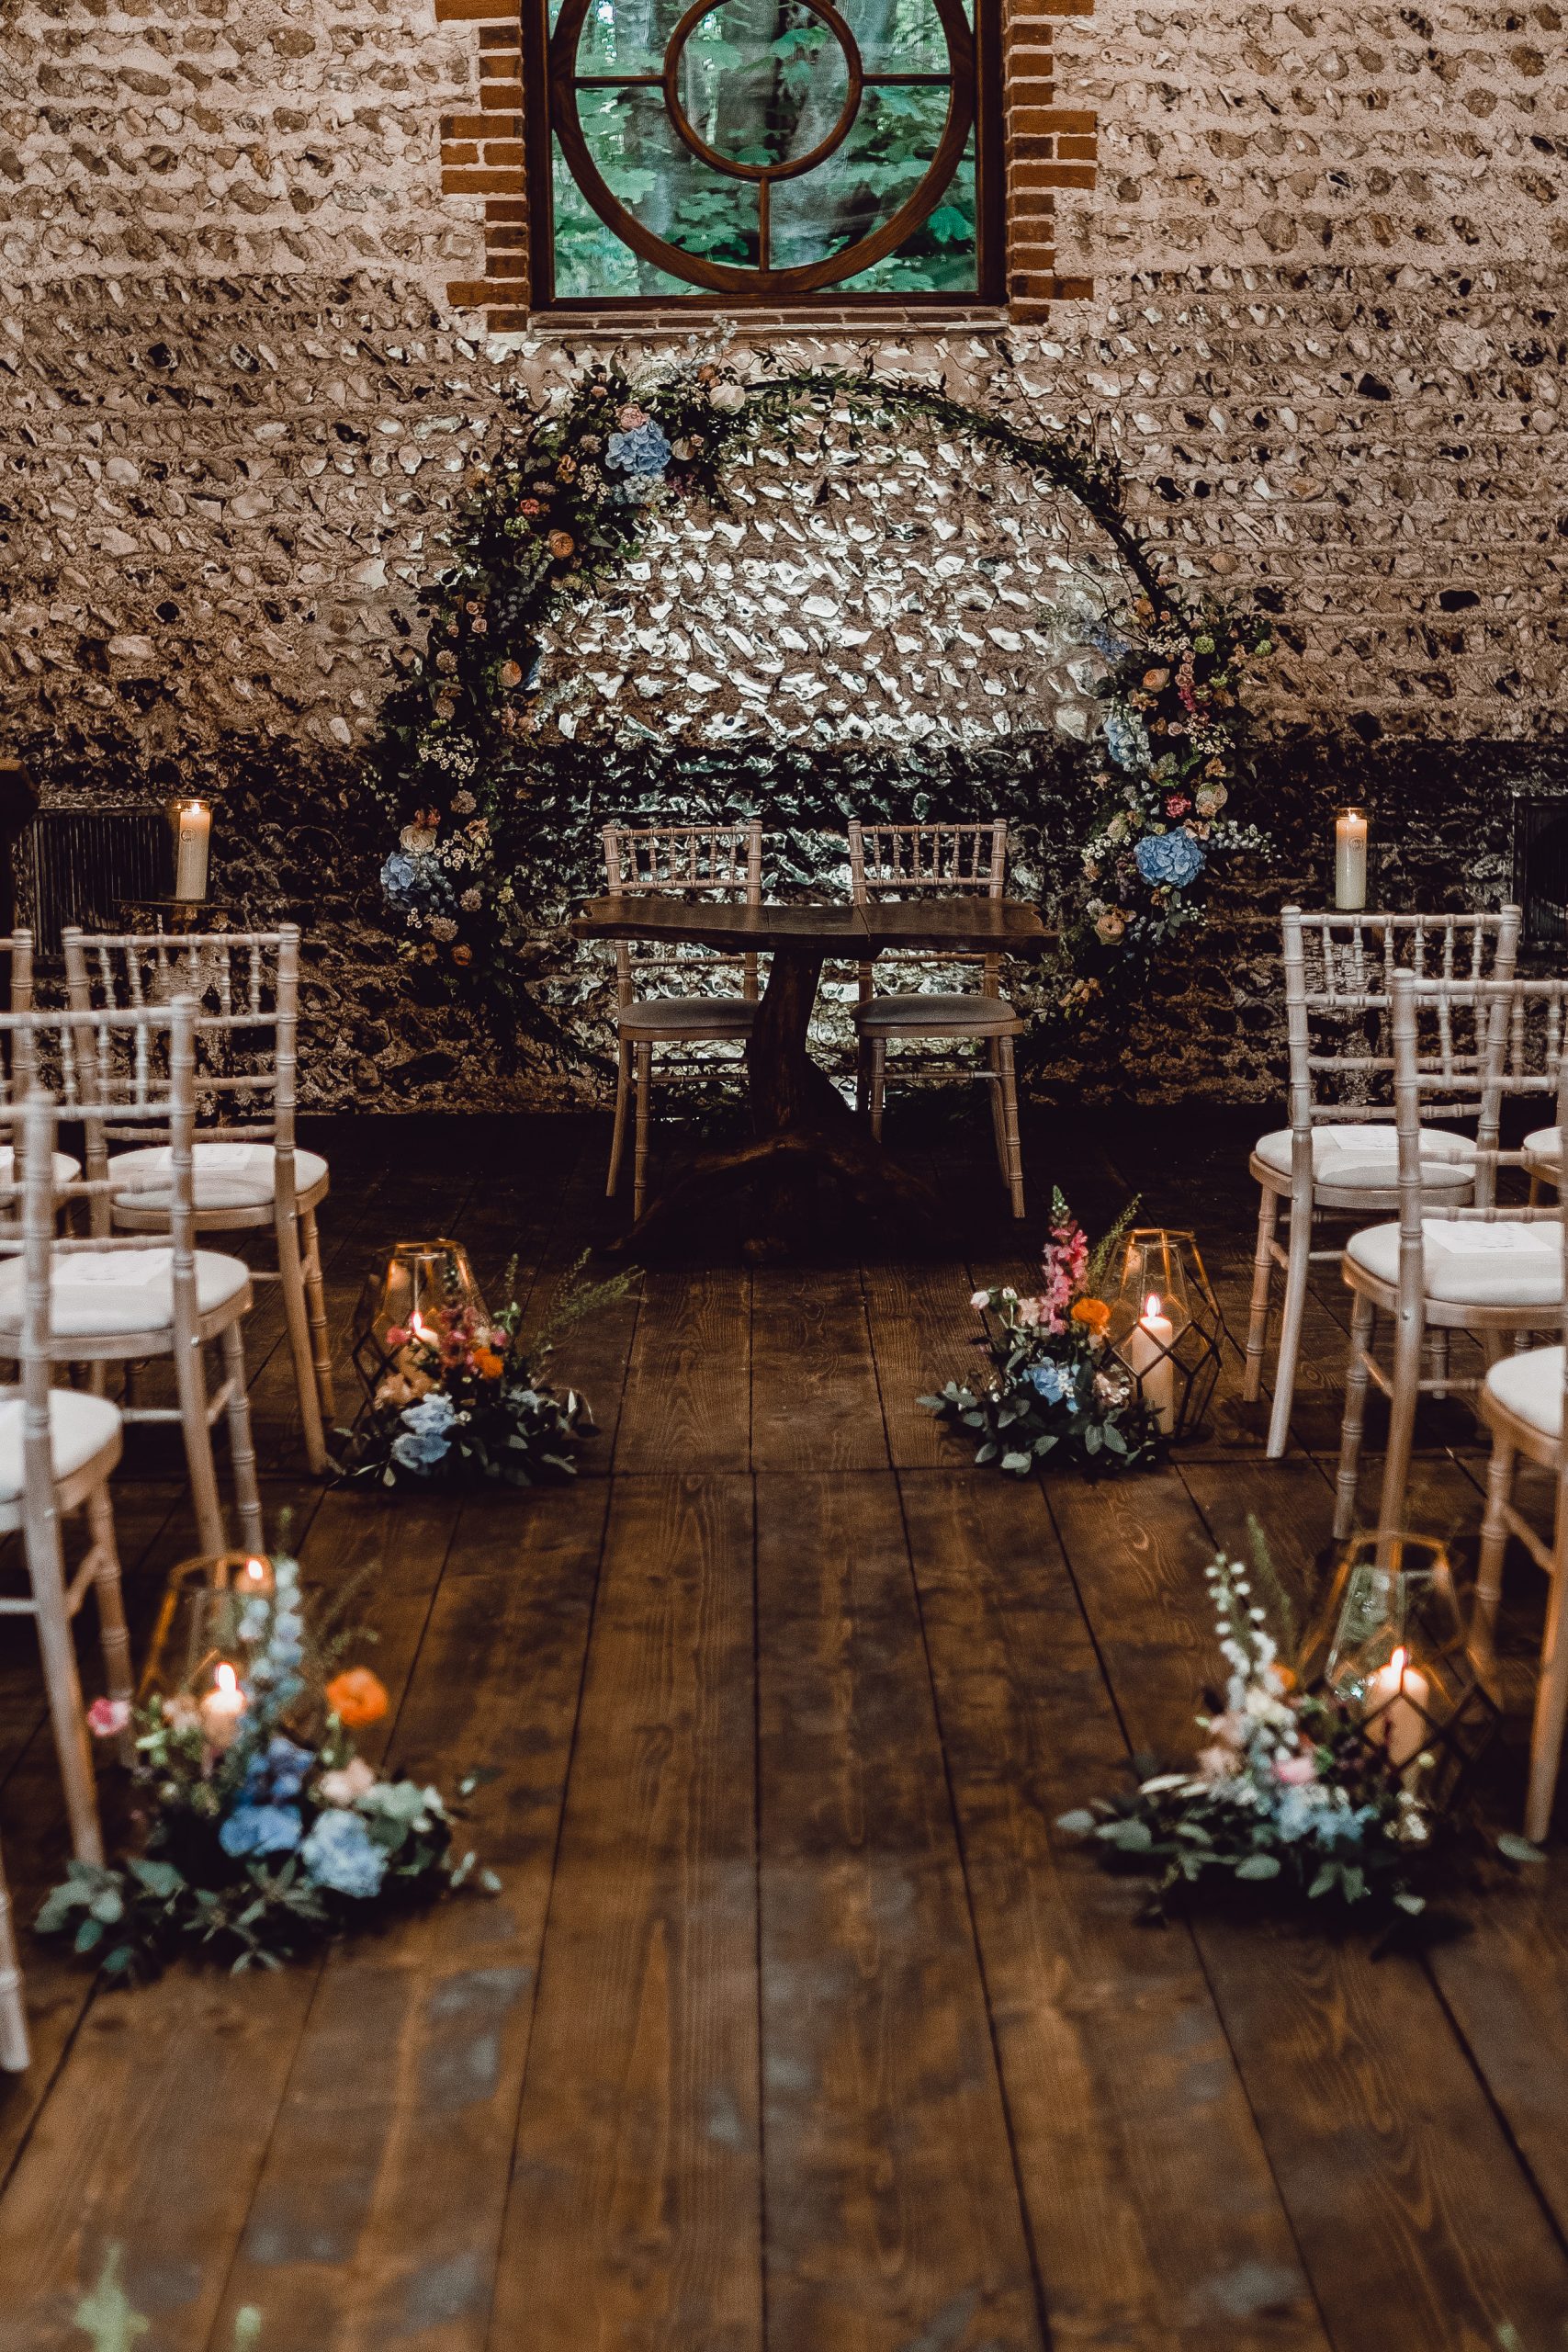 Wild Botanicals Floral Design in Sussex listed on Tie The Knot Wedding Directory